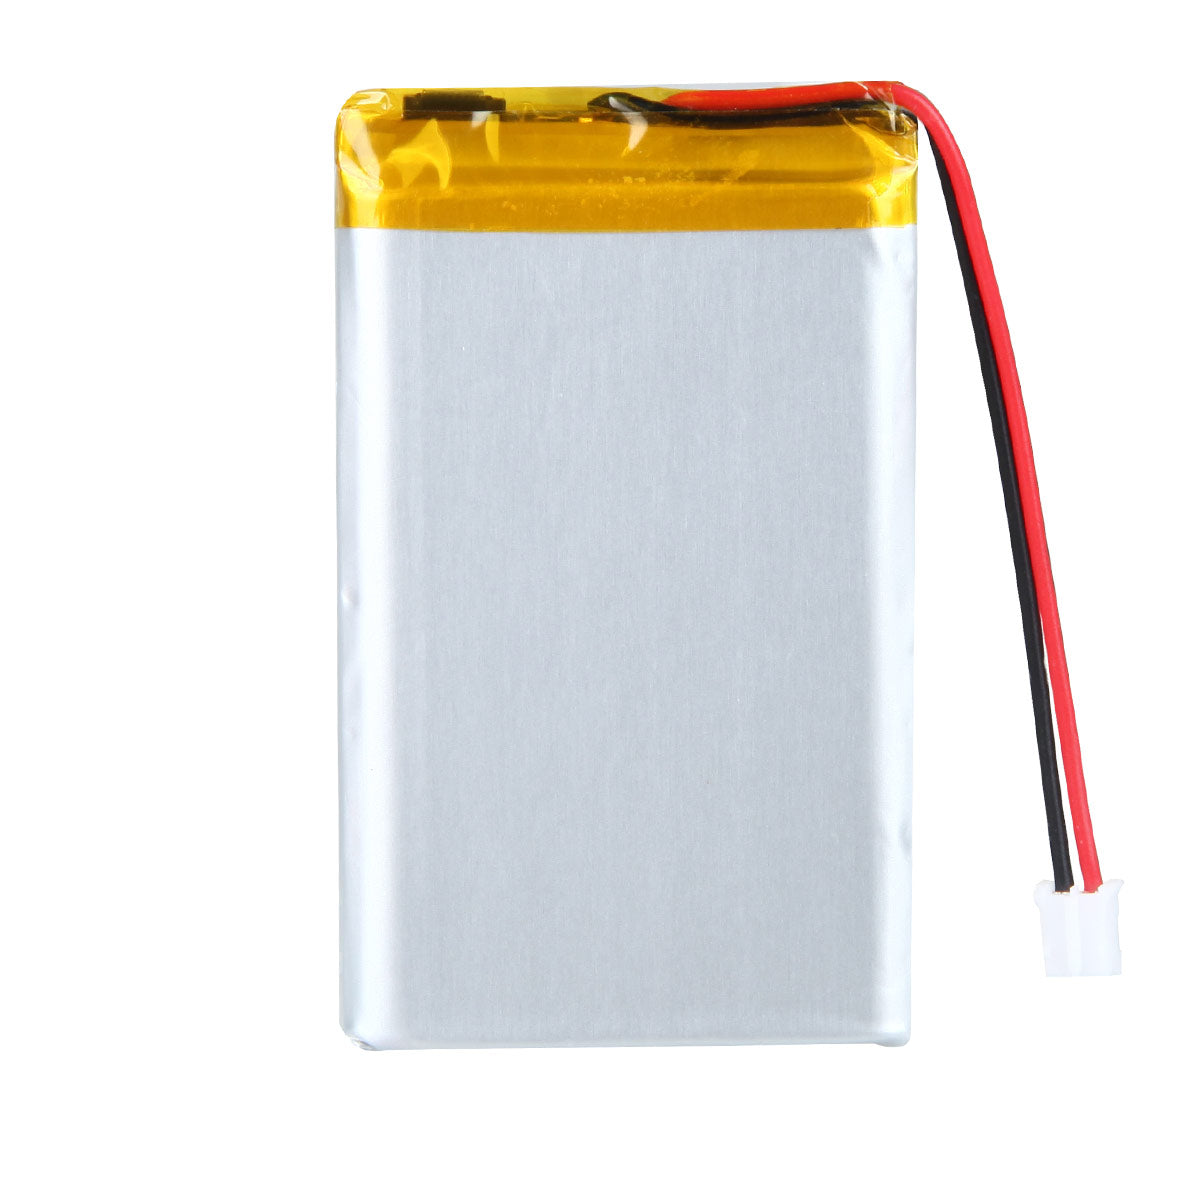 YDL 3.7V 1920mAh 703769 Rechargeable Lithium Polymer Battery